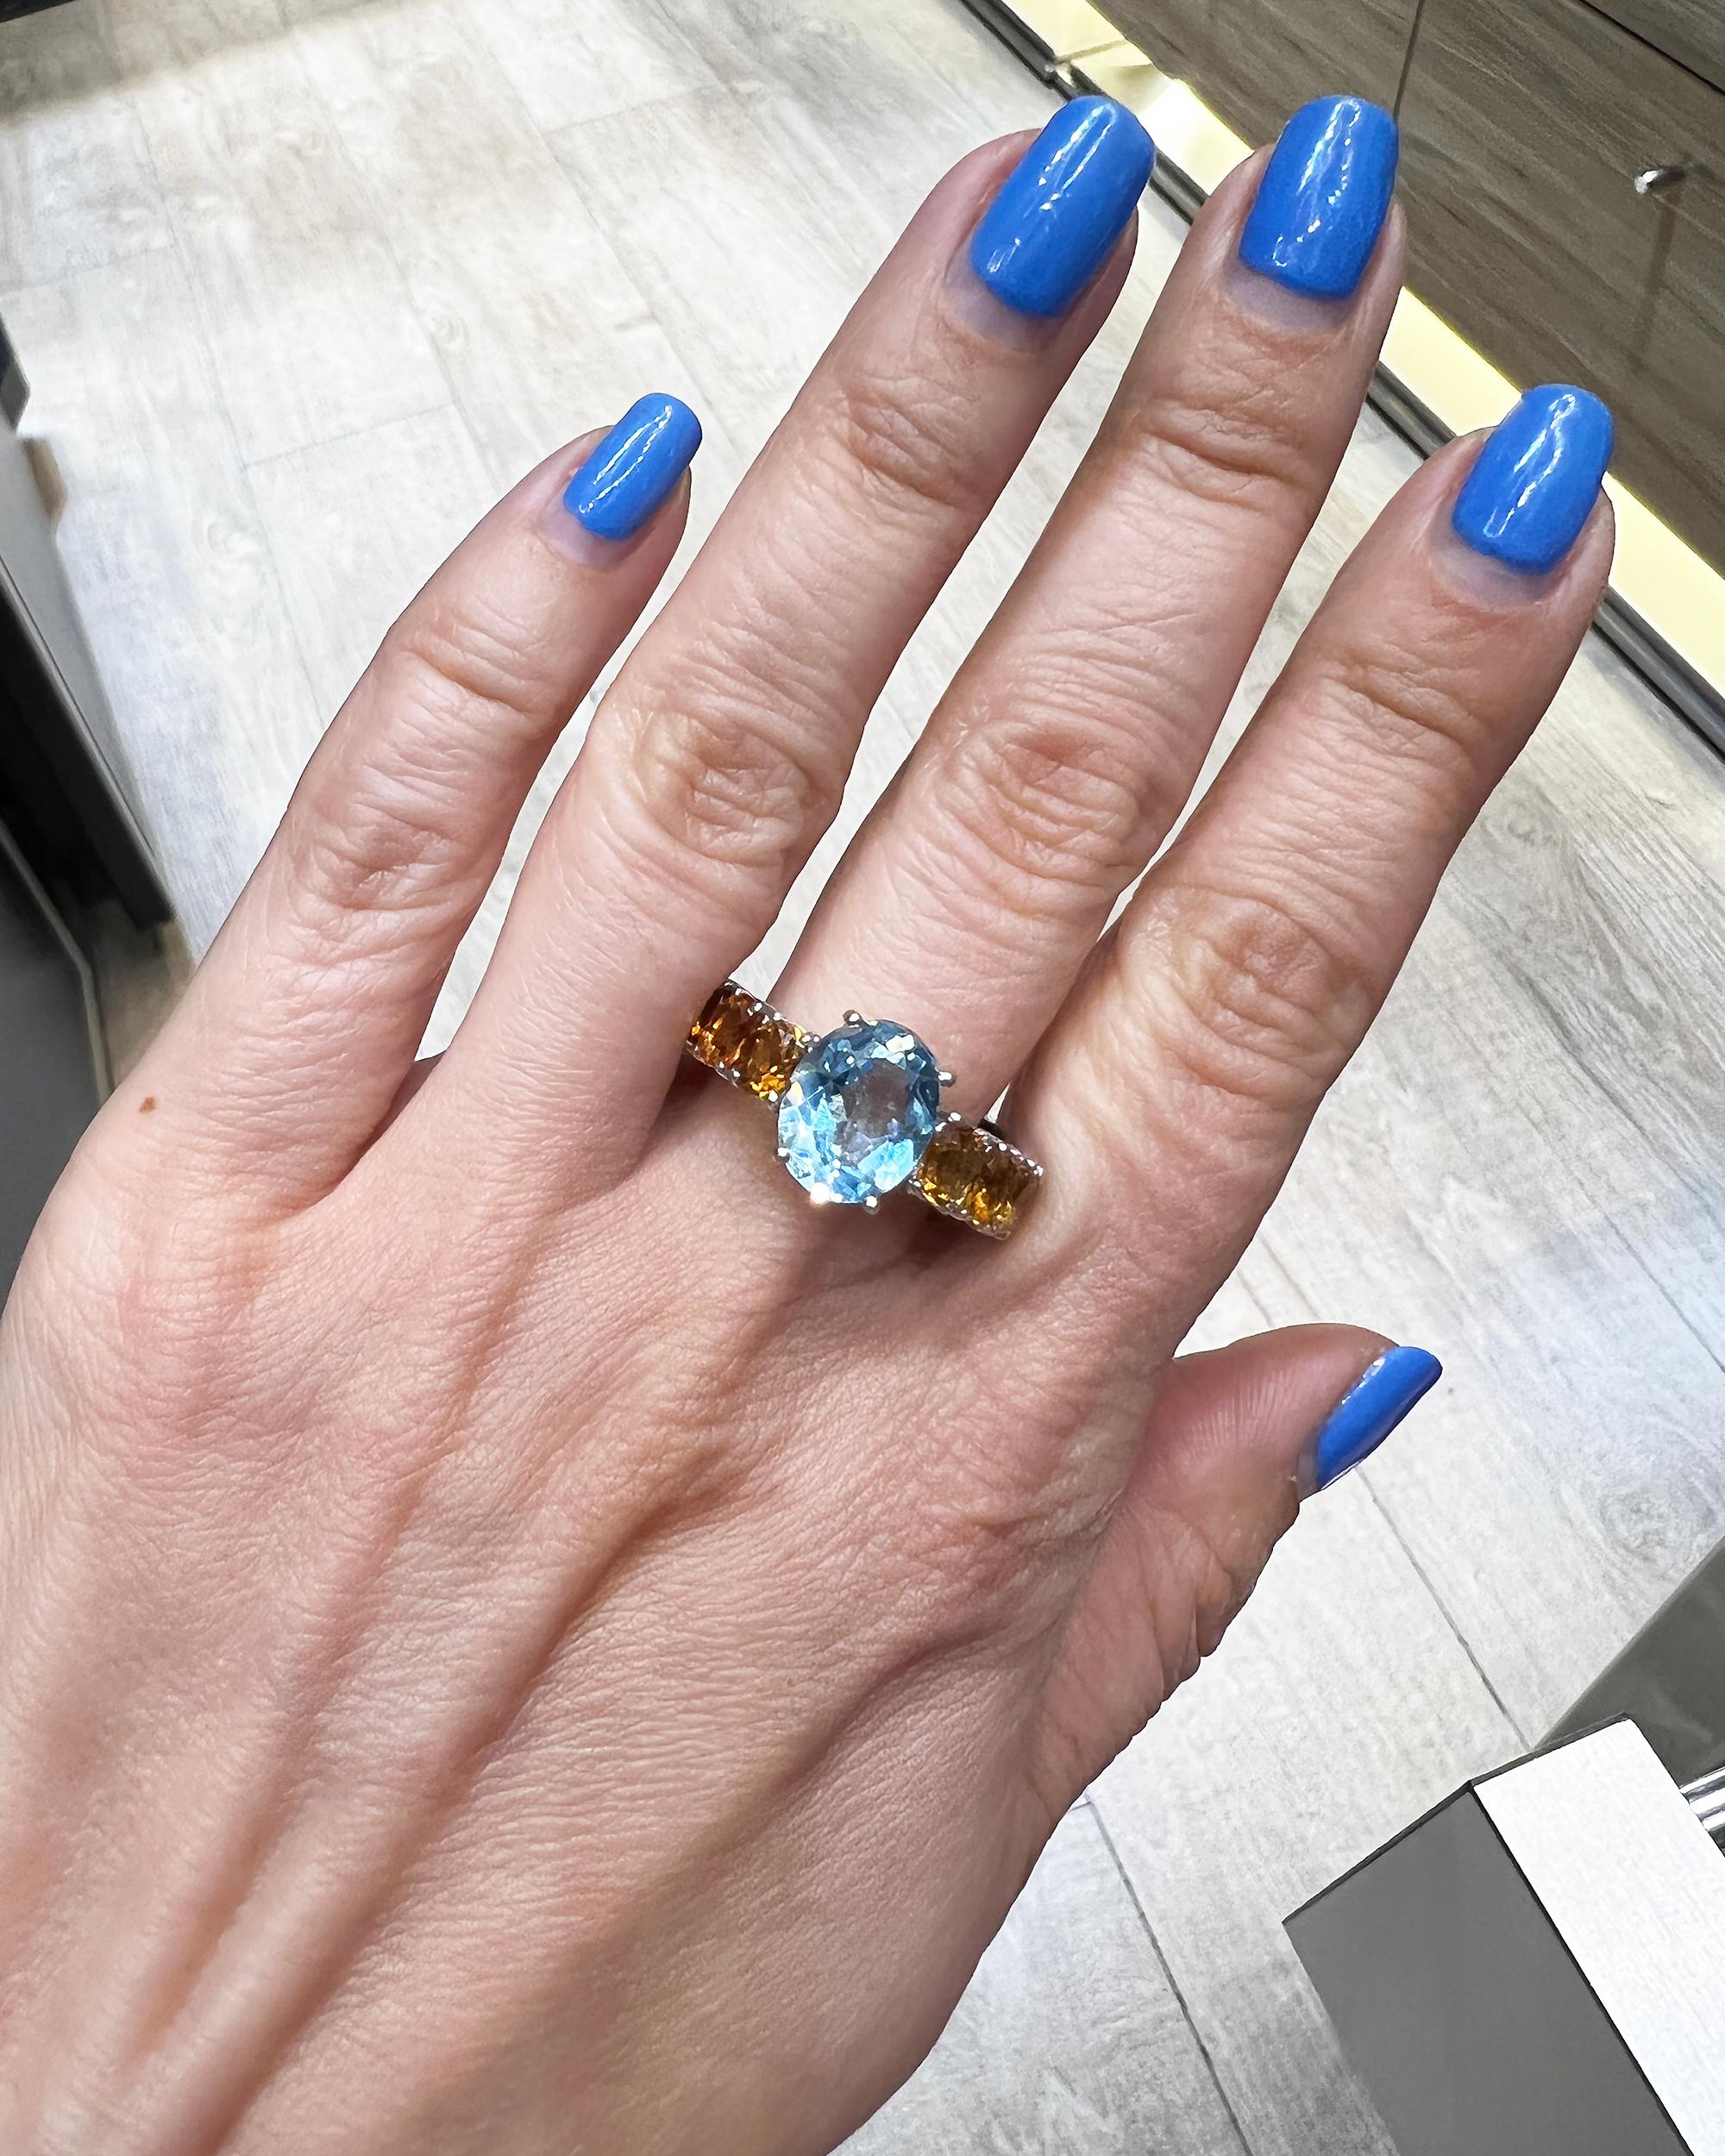 This ring is featuring an oval blue topaz weighing 8.10 carats and and oval citrine stones half-way on both sides of the band.
Metal is 18k white gold.
Weight of the ring is 9.90 grams. 
Size 7.
Retail price is $3,128.
A similar ring available for